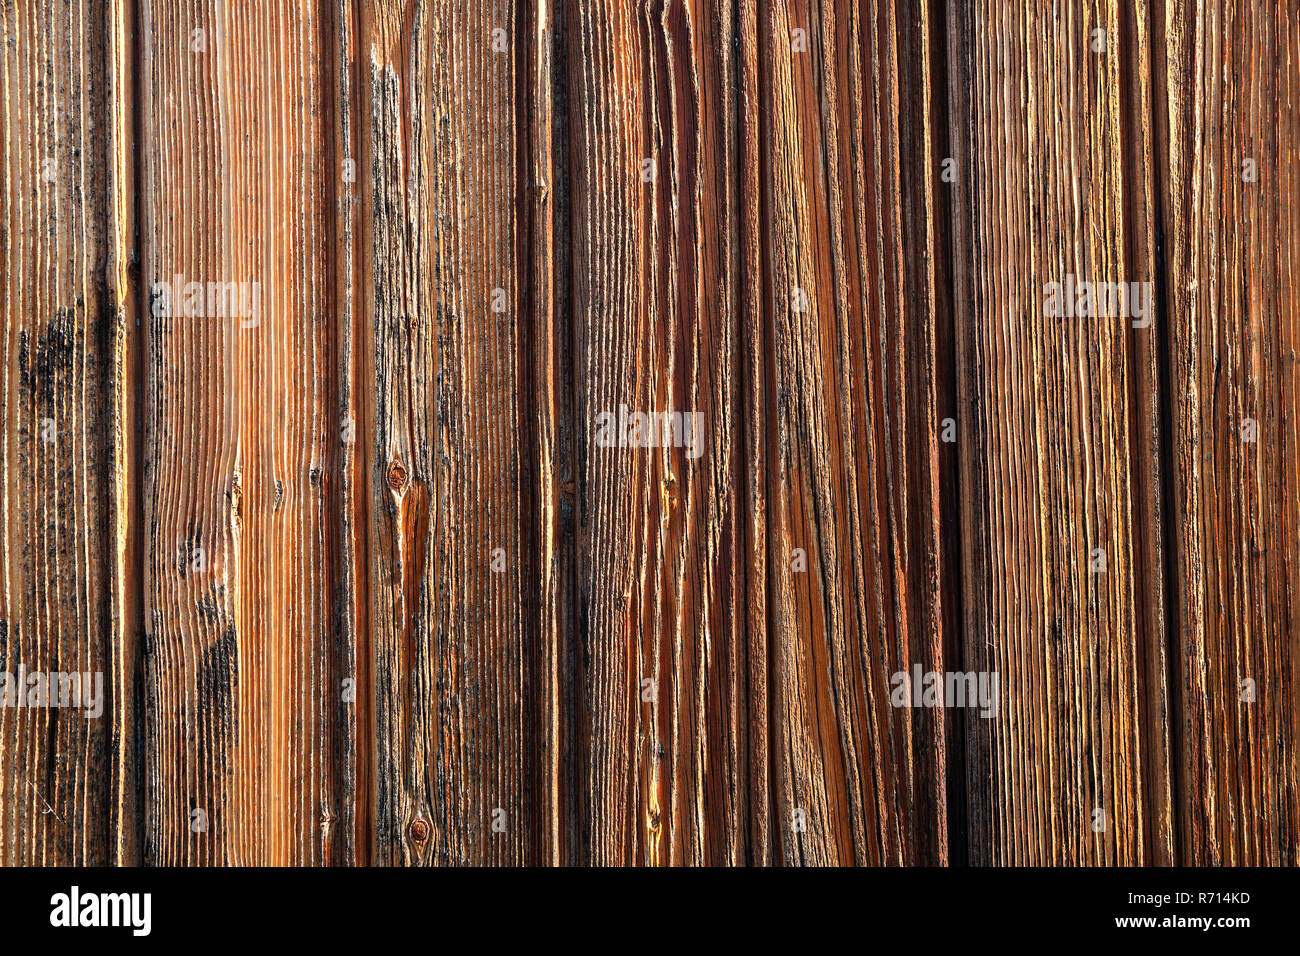 Old weathered wooden wall, Baden-Württemberg, Germany Stock Photo